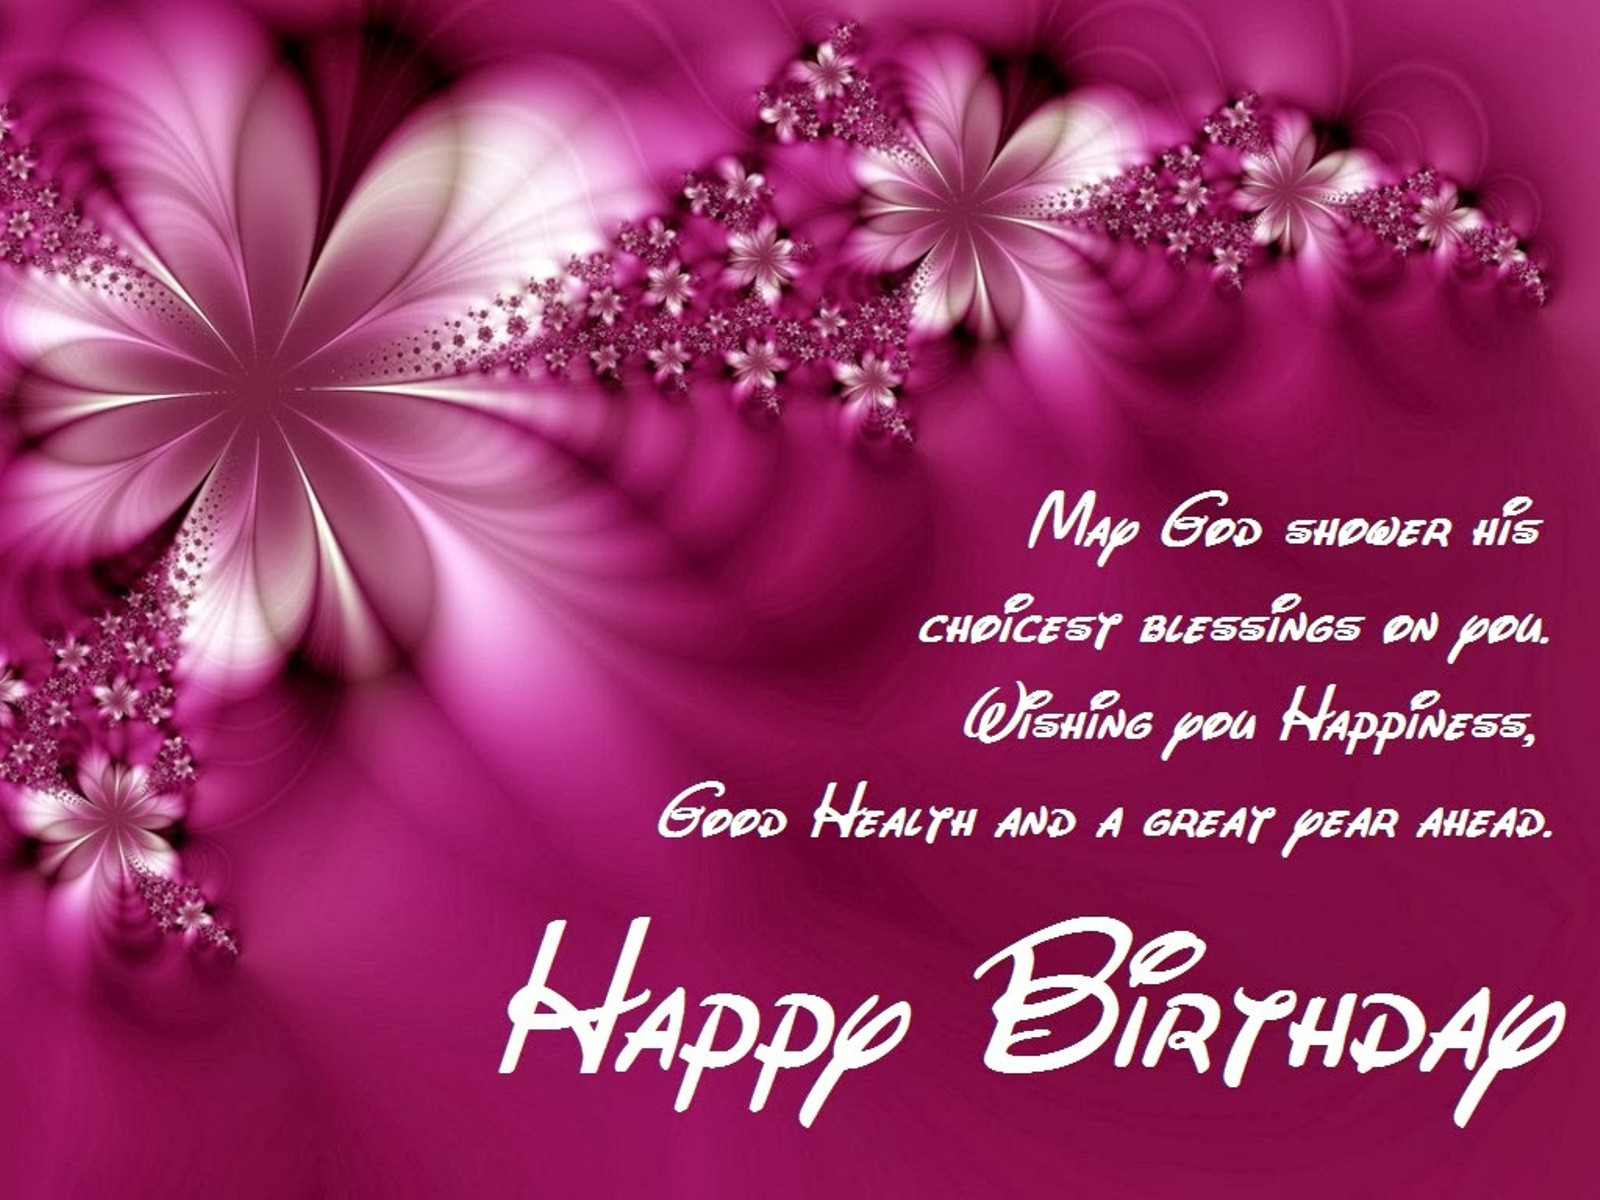 Birthday Wishes And Quotes
 The 50 Best Happy Birthday Quotes of All Time